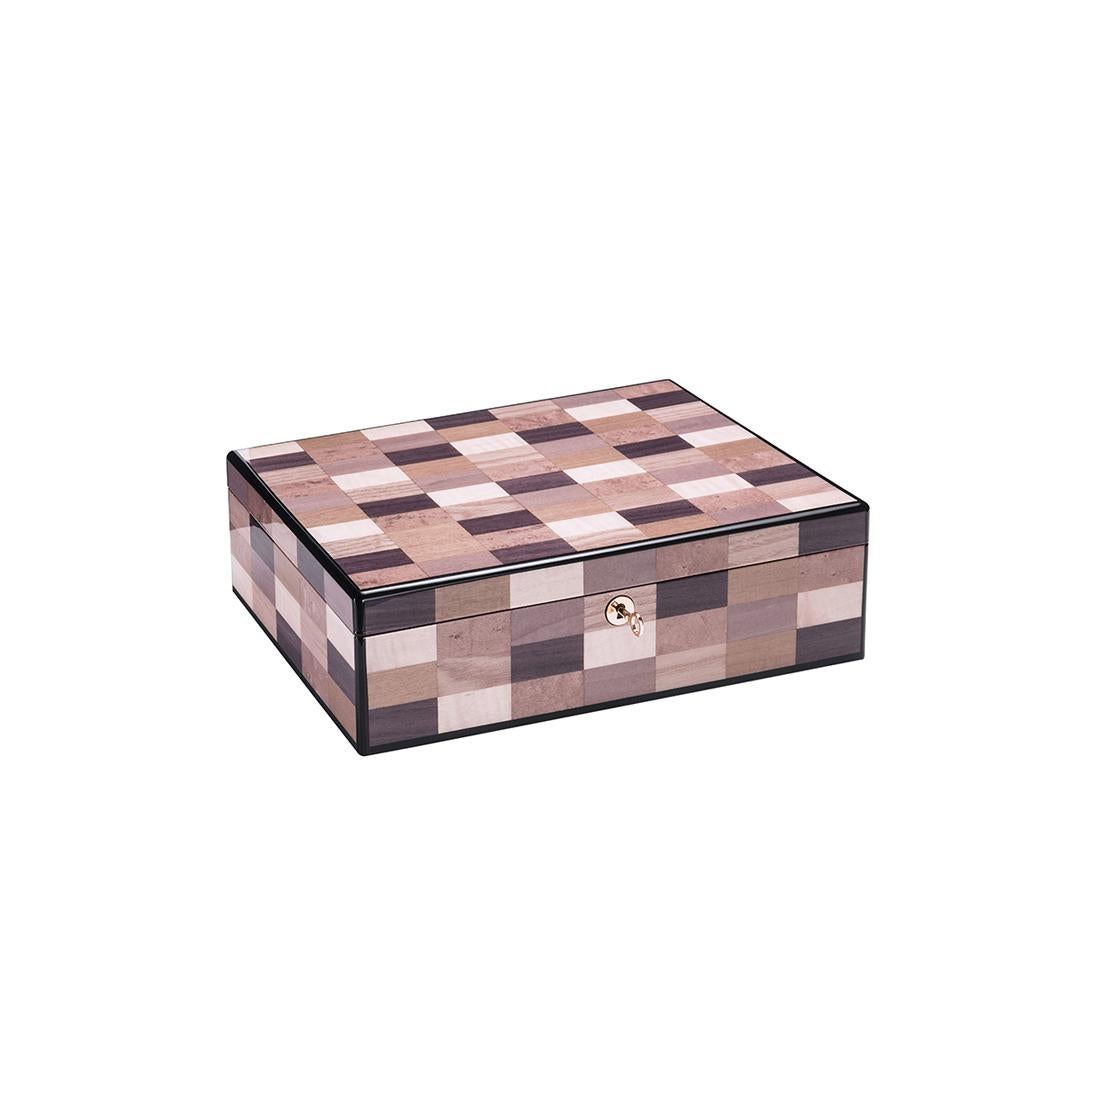 A stylish and practical design suited for safekeeping cherished items, this rectangular box will add an accent of sophistication to a vanity desk, console or nightstand. Masterfully handcrafted of mahogany wood, it is lined with beige Alcantara and